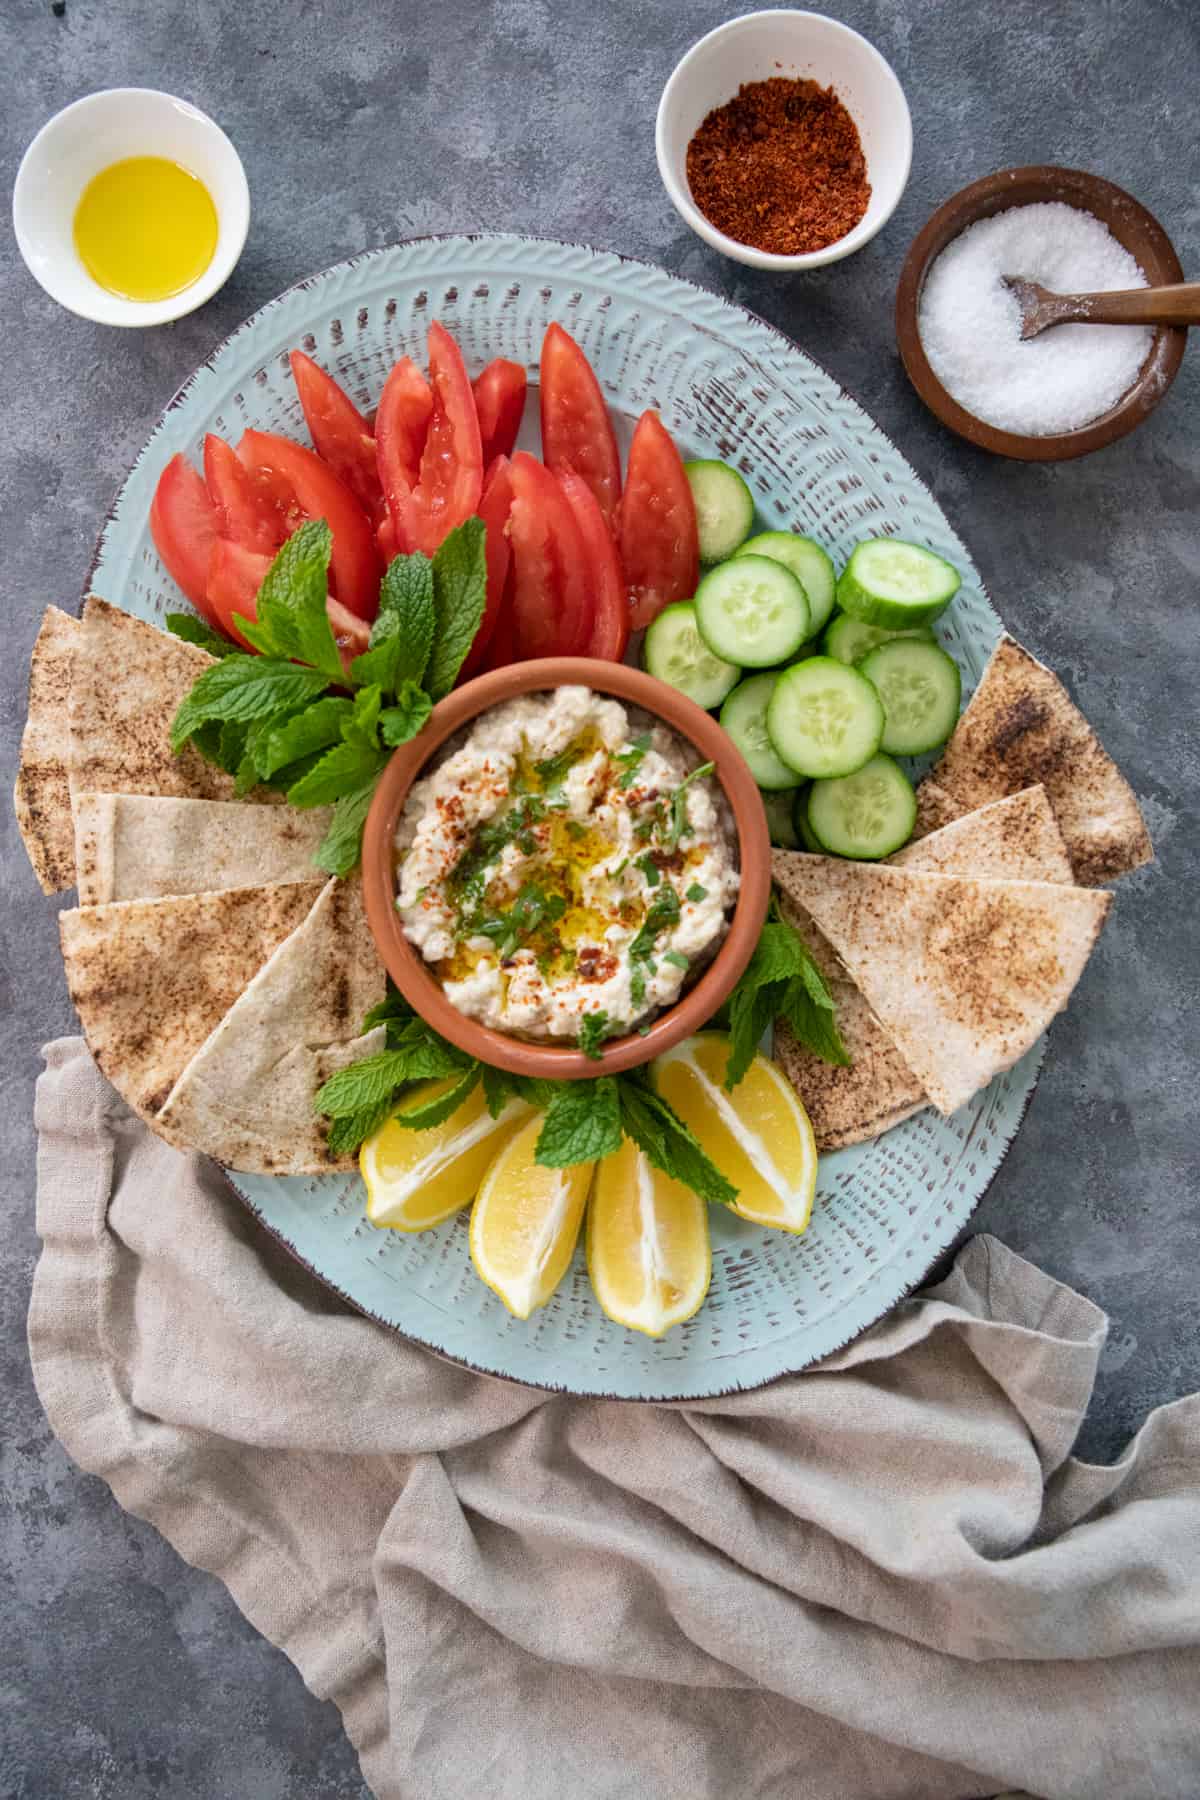 Mutabal is a Middle Eastern eggplant dip with a nice smoky flavor. It's different from baba ganoush and can be served with fresh pita bread as an appetizer or on a mezze platter for a tasty feast!
